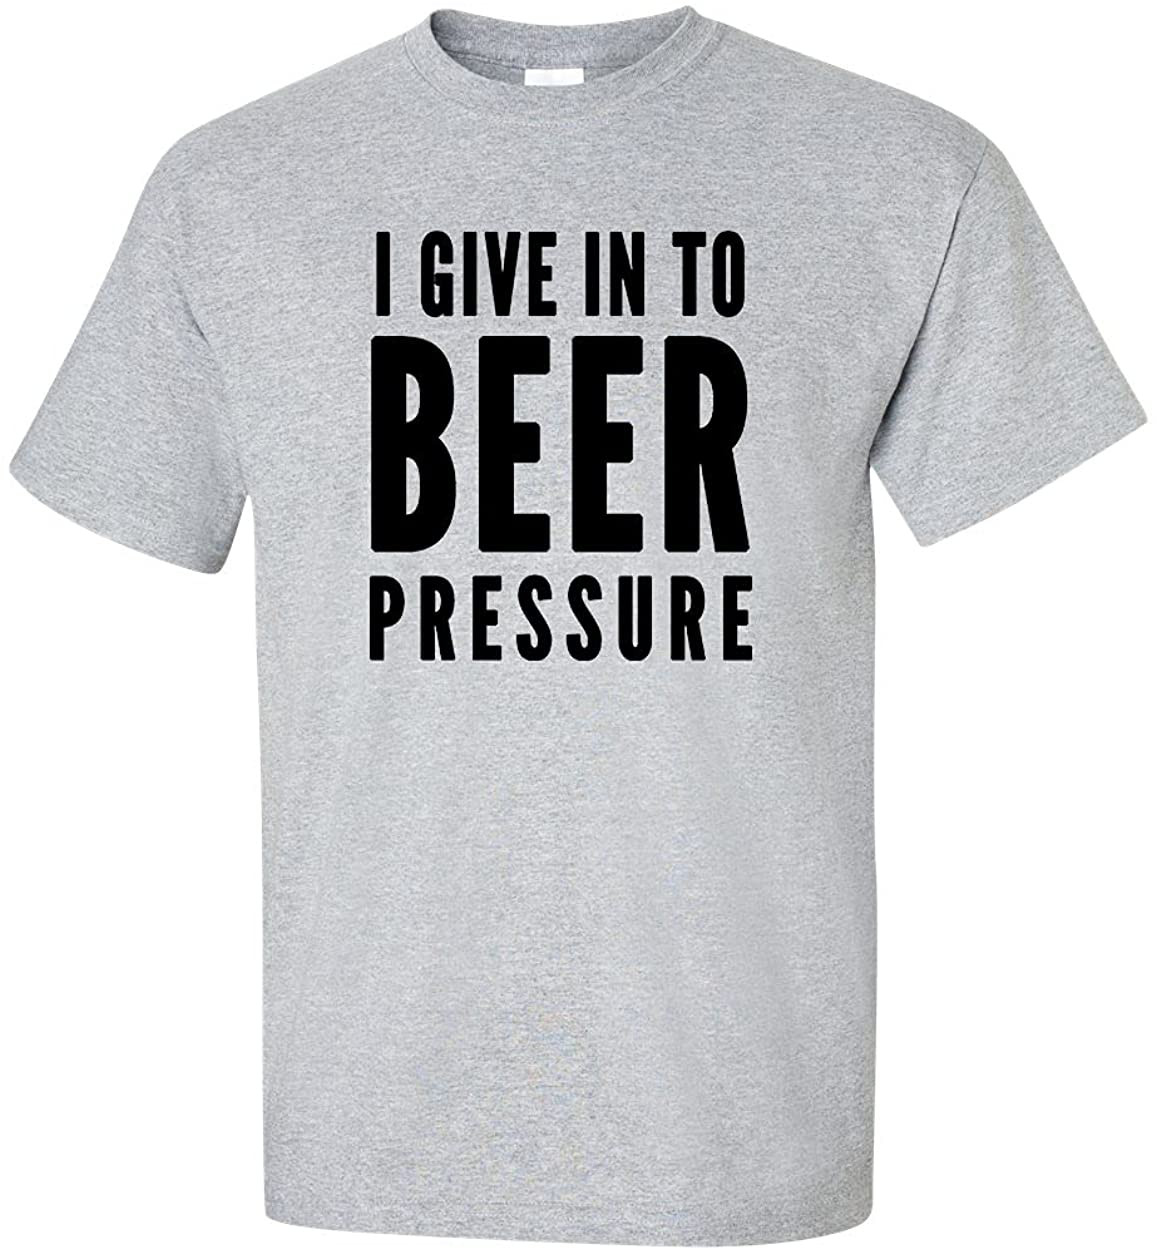 I Give In To Beer Pressure T-Shirt